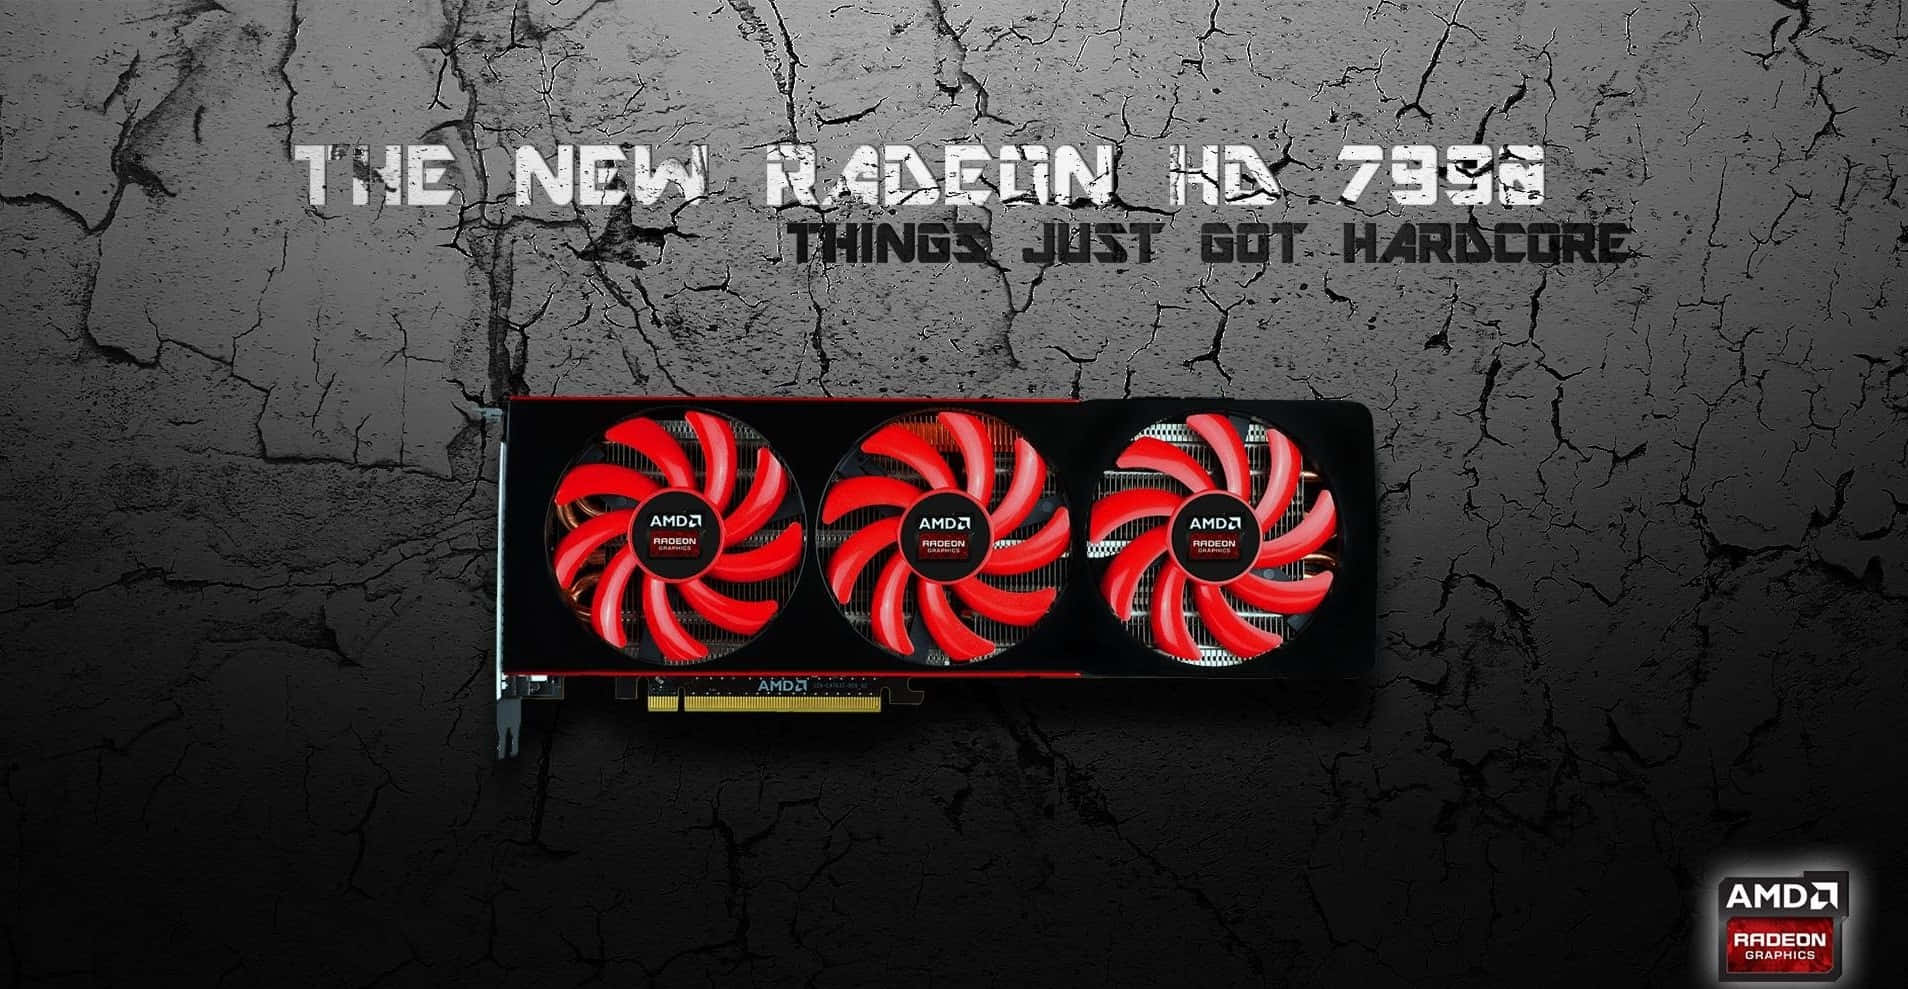 Take your gaming performance to the next level with Radeon. Wallpaper